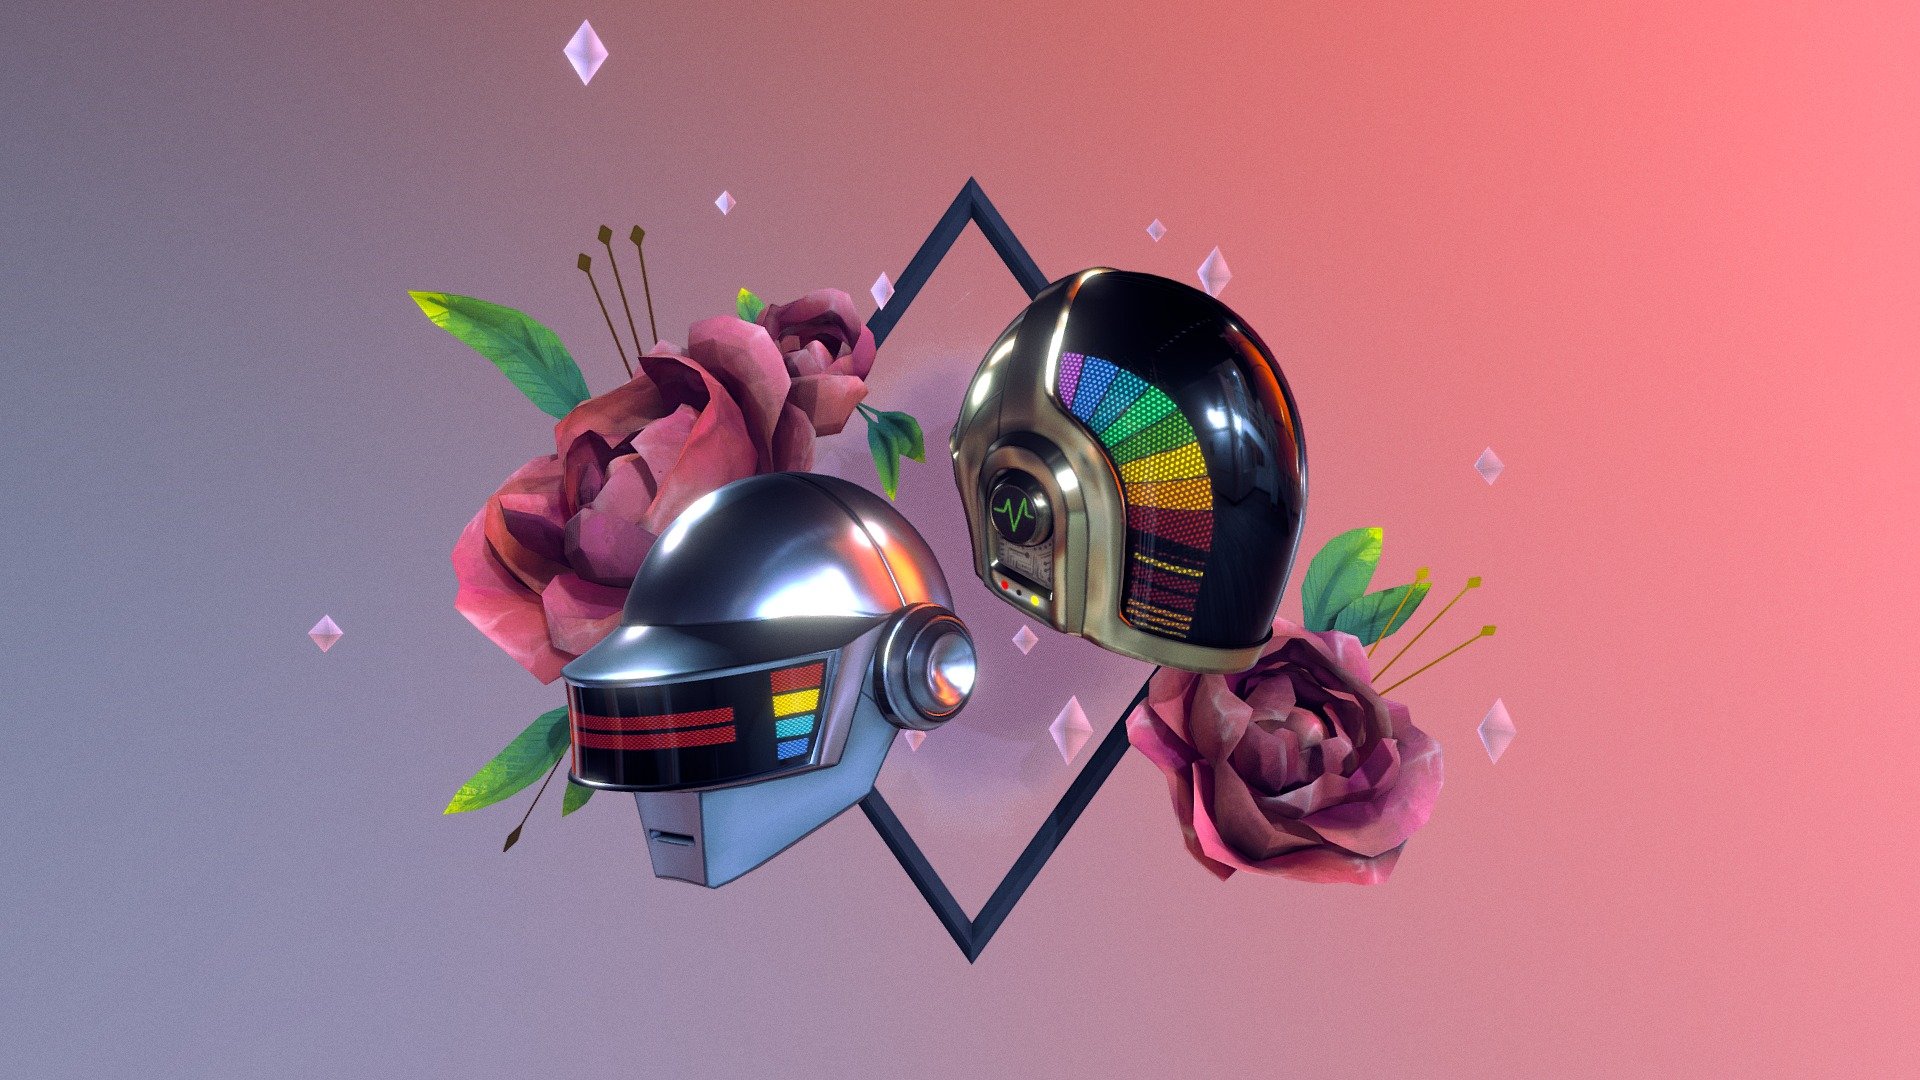 My little memorial for Daft Punk made for the #DaftPunkUniverseChallenge. 
I love the blend of retro and futuristic elements that Daft Punk's music and art encompasses. The Discovery era helmets and aesthetic always stood out to me, and wanted to make my own take on it. 

Everything made by me with love!  

Made using Blender and Substance Painter 3d model